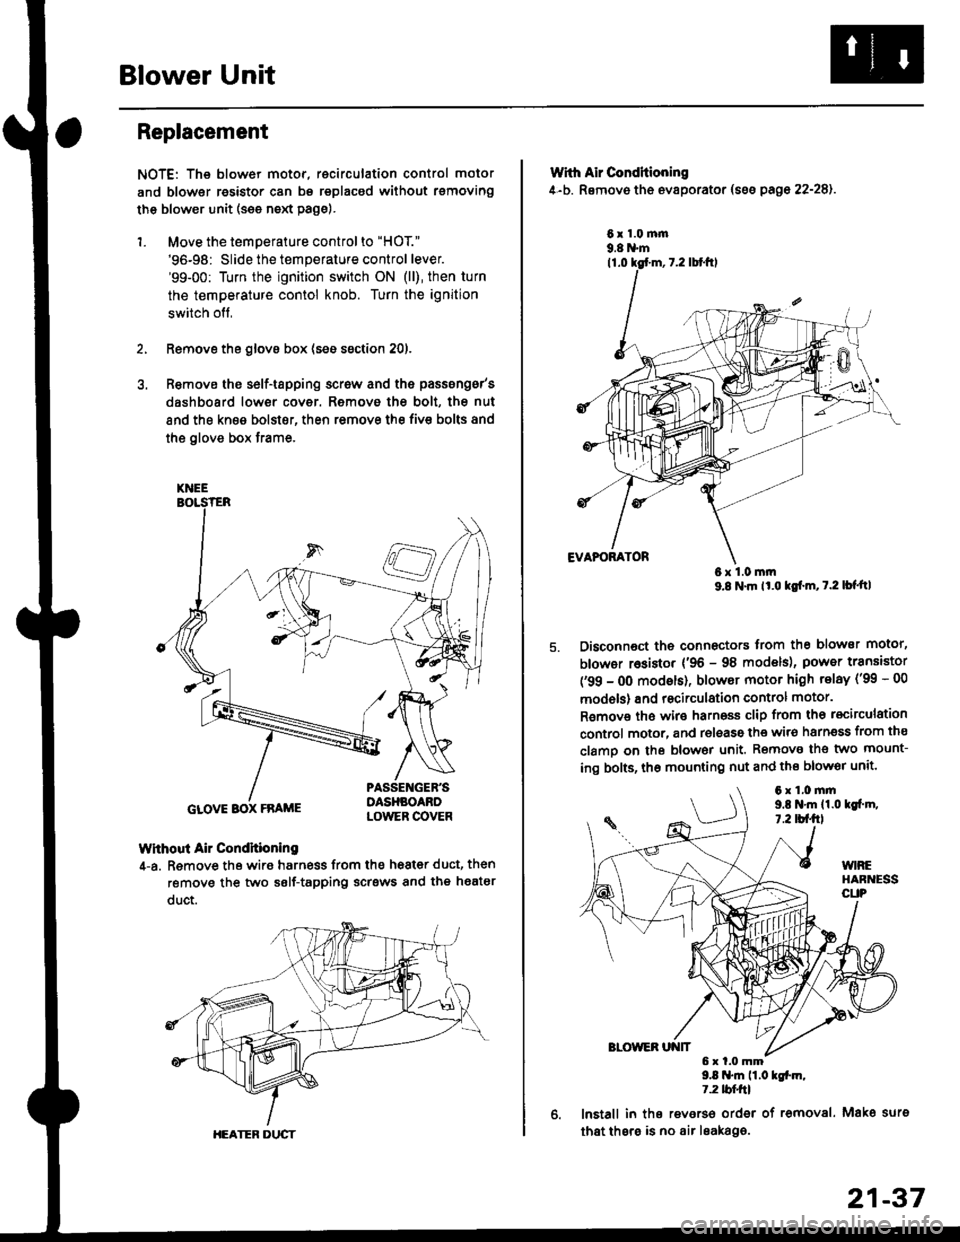 HONDA CIVIC 1998 6.G Workshop Manual Blower Unit
Replacement
NOTE: The blower motor, recirculation control motor
and blower resistor can bs replacsd without rsmoving
th€ blower unit (see neld Page).
1. Move the temperature control to "